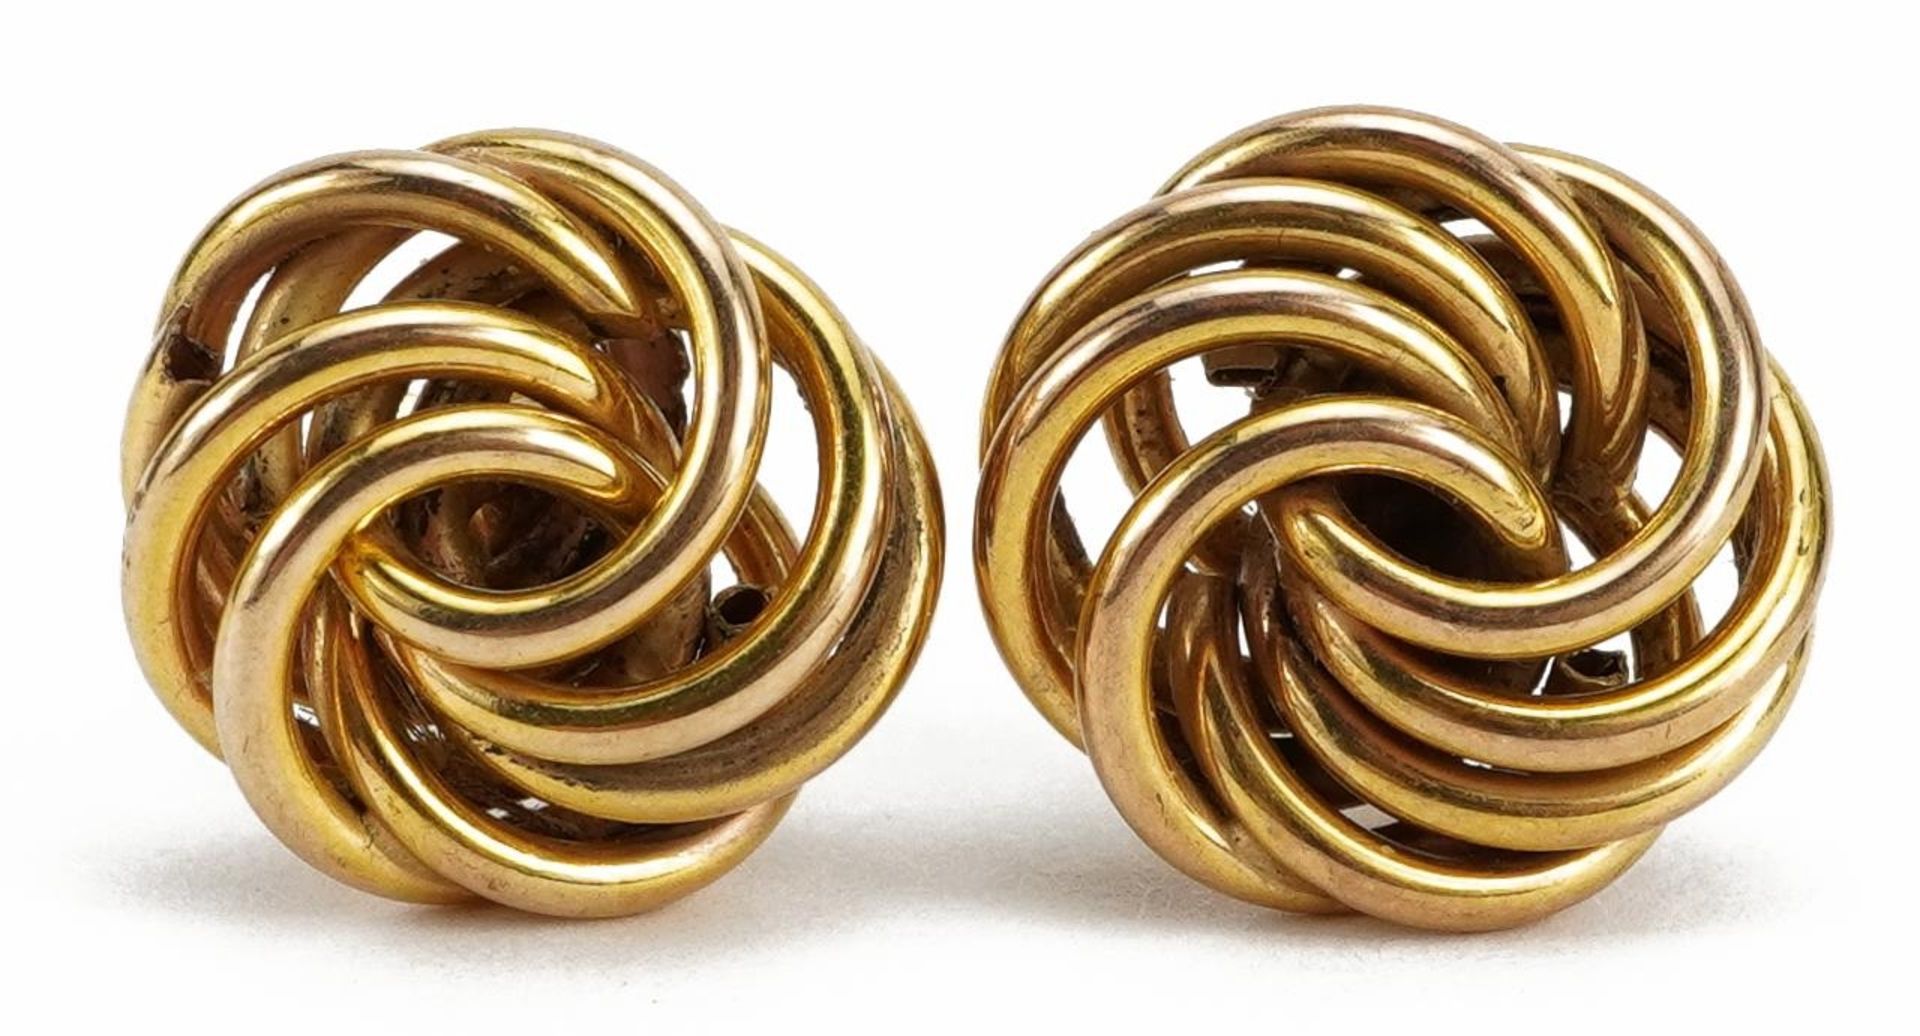 Pair of 9ct gold knot design stud earrings, 1.2cm in diameter, 1.9g : For further information on